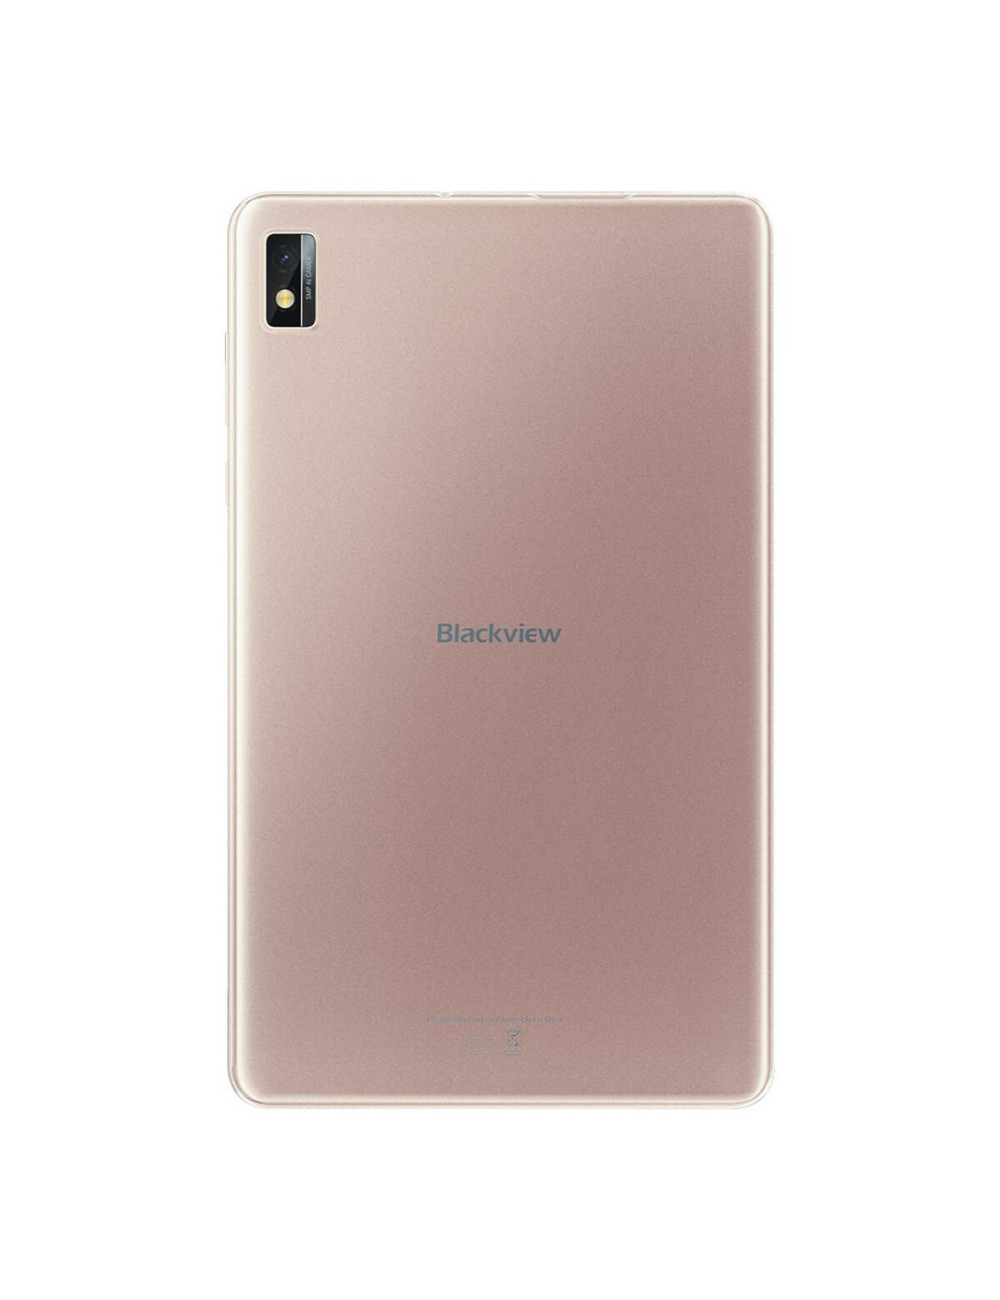  Blackview Tablet 8 inch Android Tablet, Tab6 Android